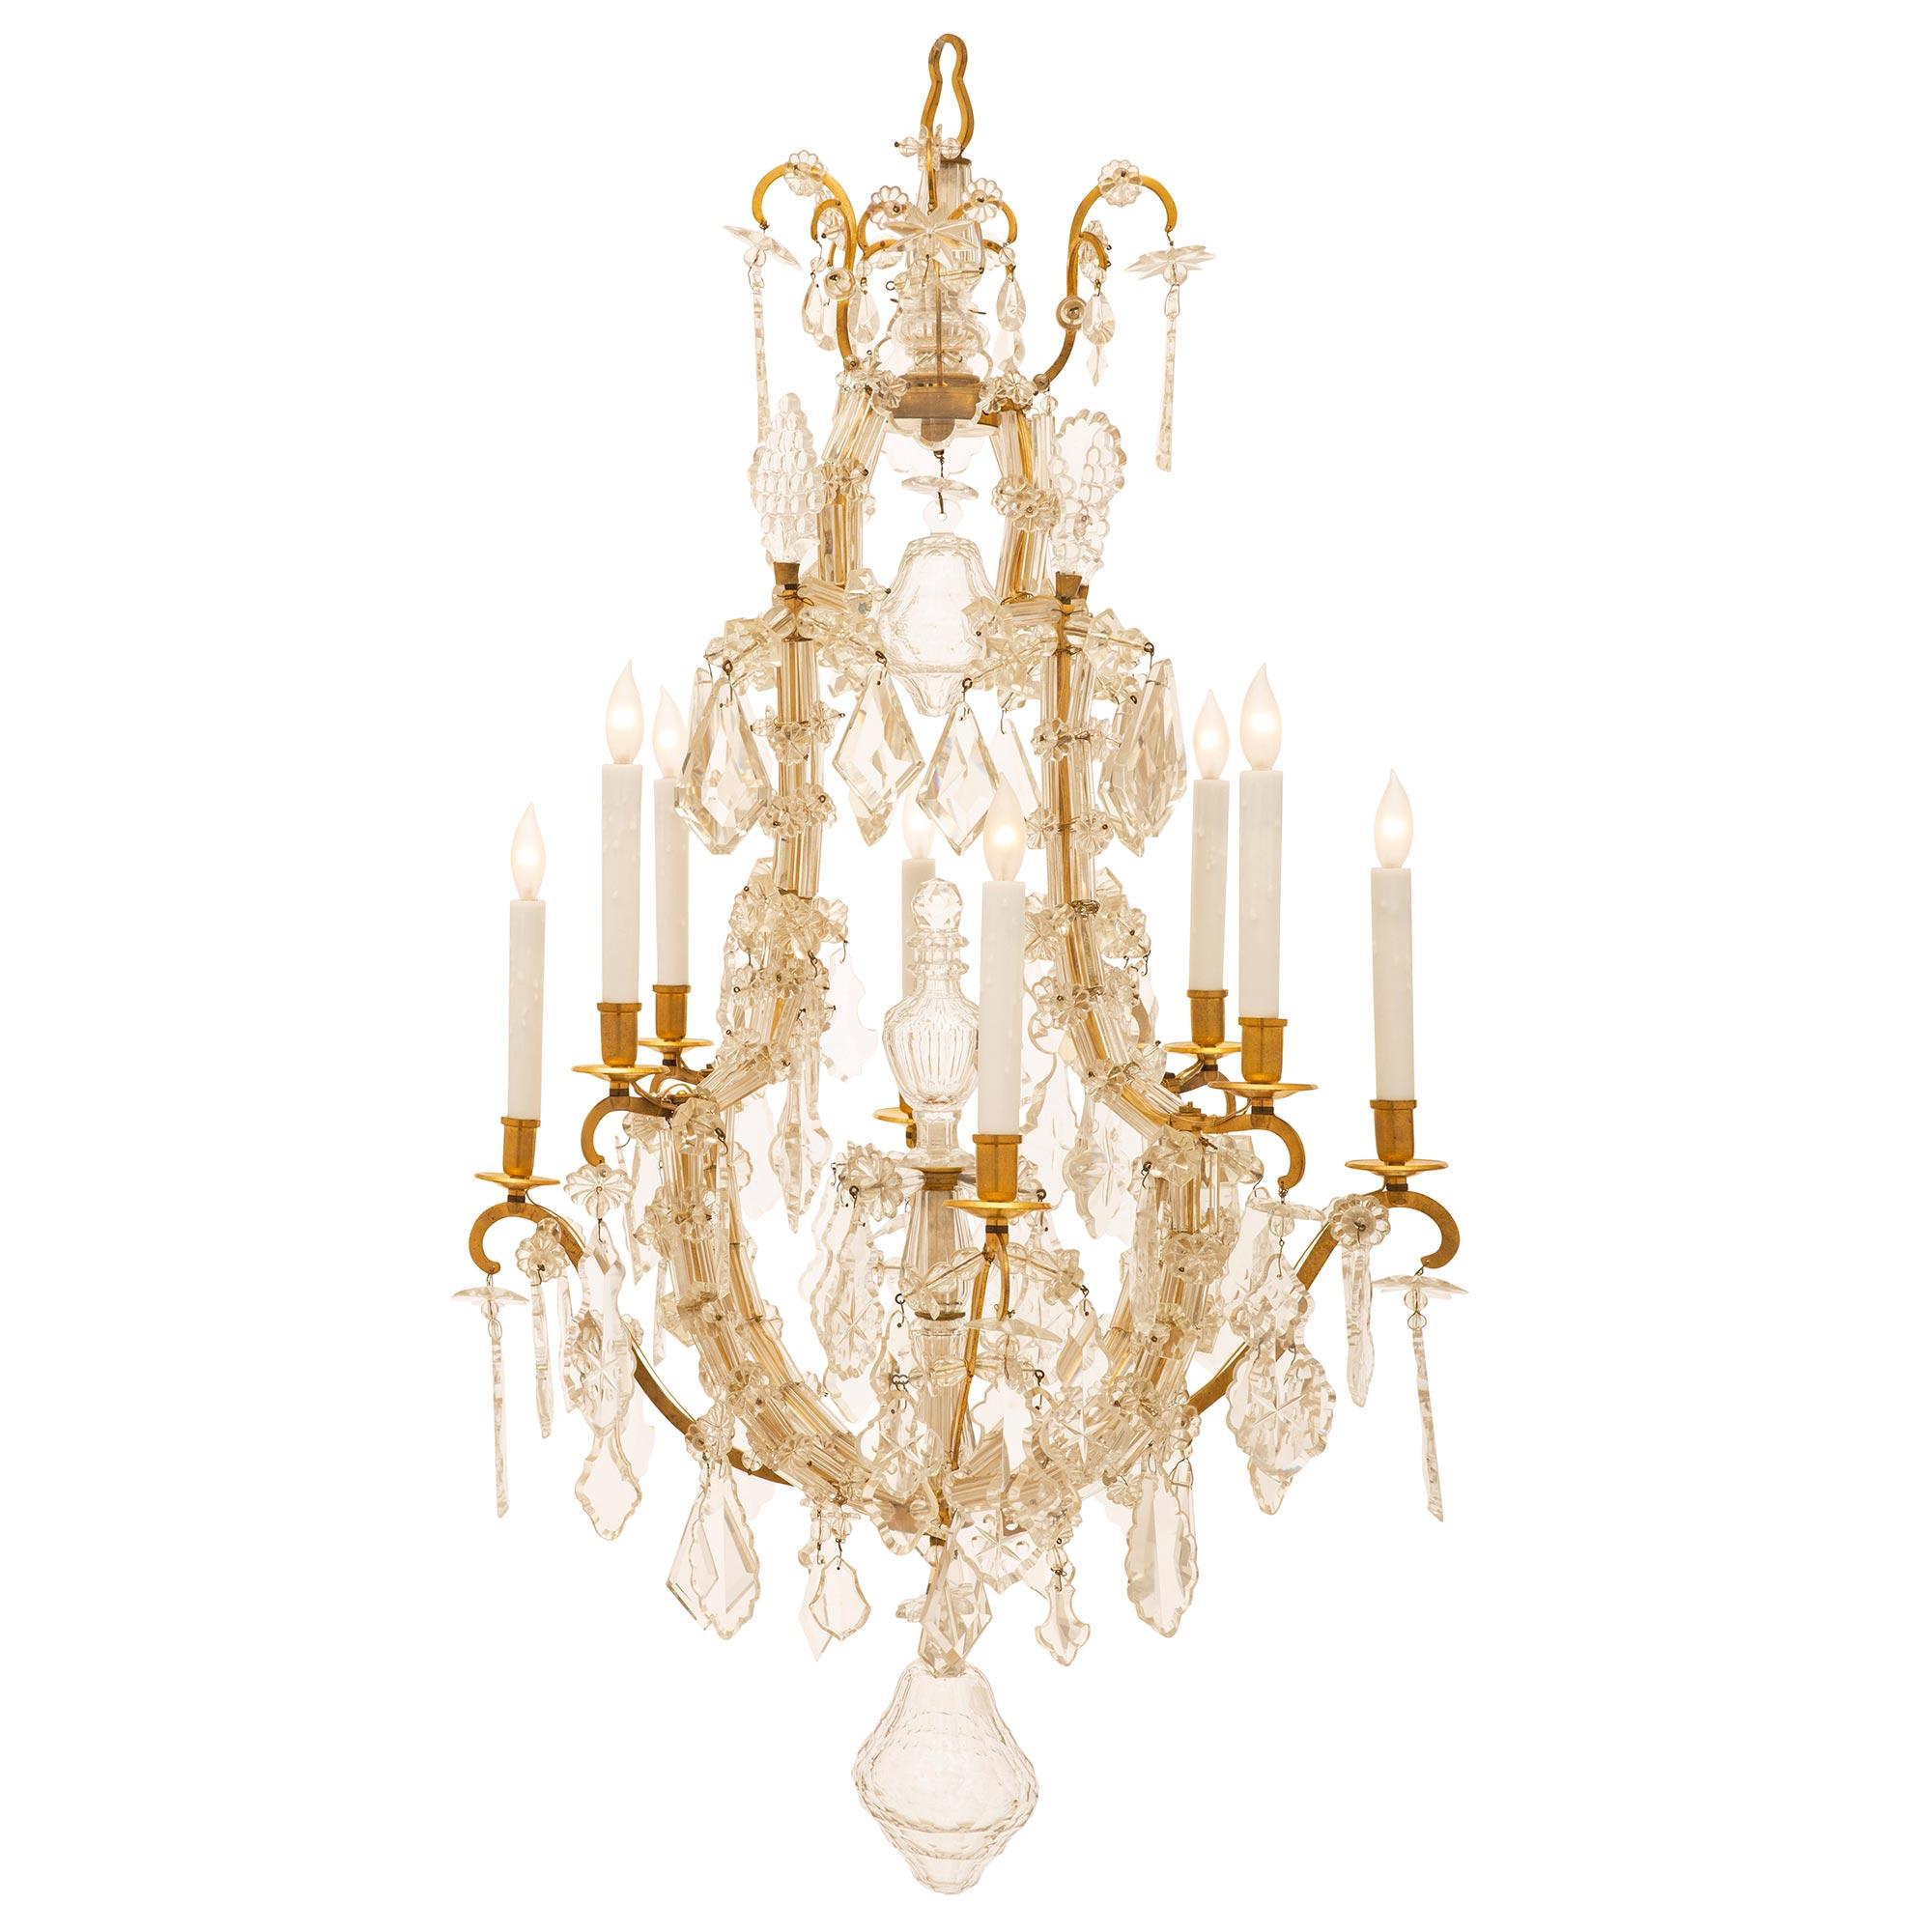 A very elegant and extremely high quality French mid 19th century Louis XV st. ormolu and Baccarat crystal chandelier. The eight arm chandelier has an open cage and a central crystal fut with a top perfume bottle design under a hanging cut crystal